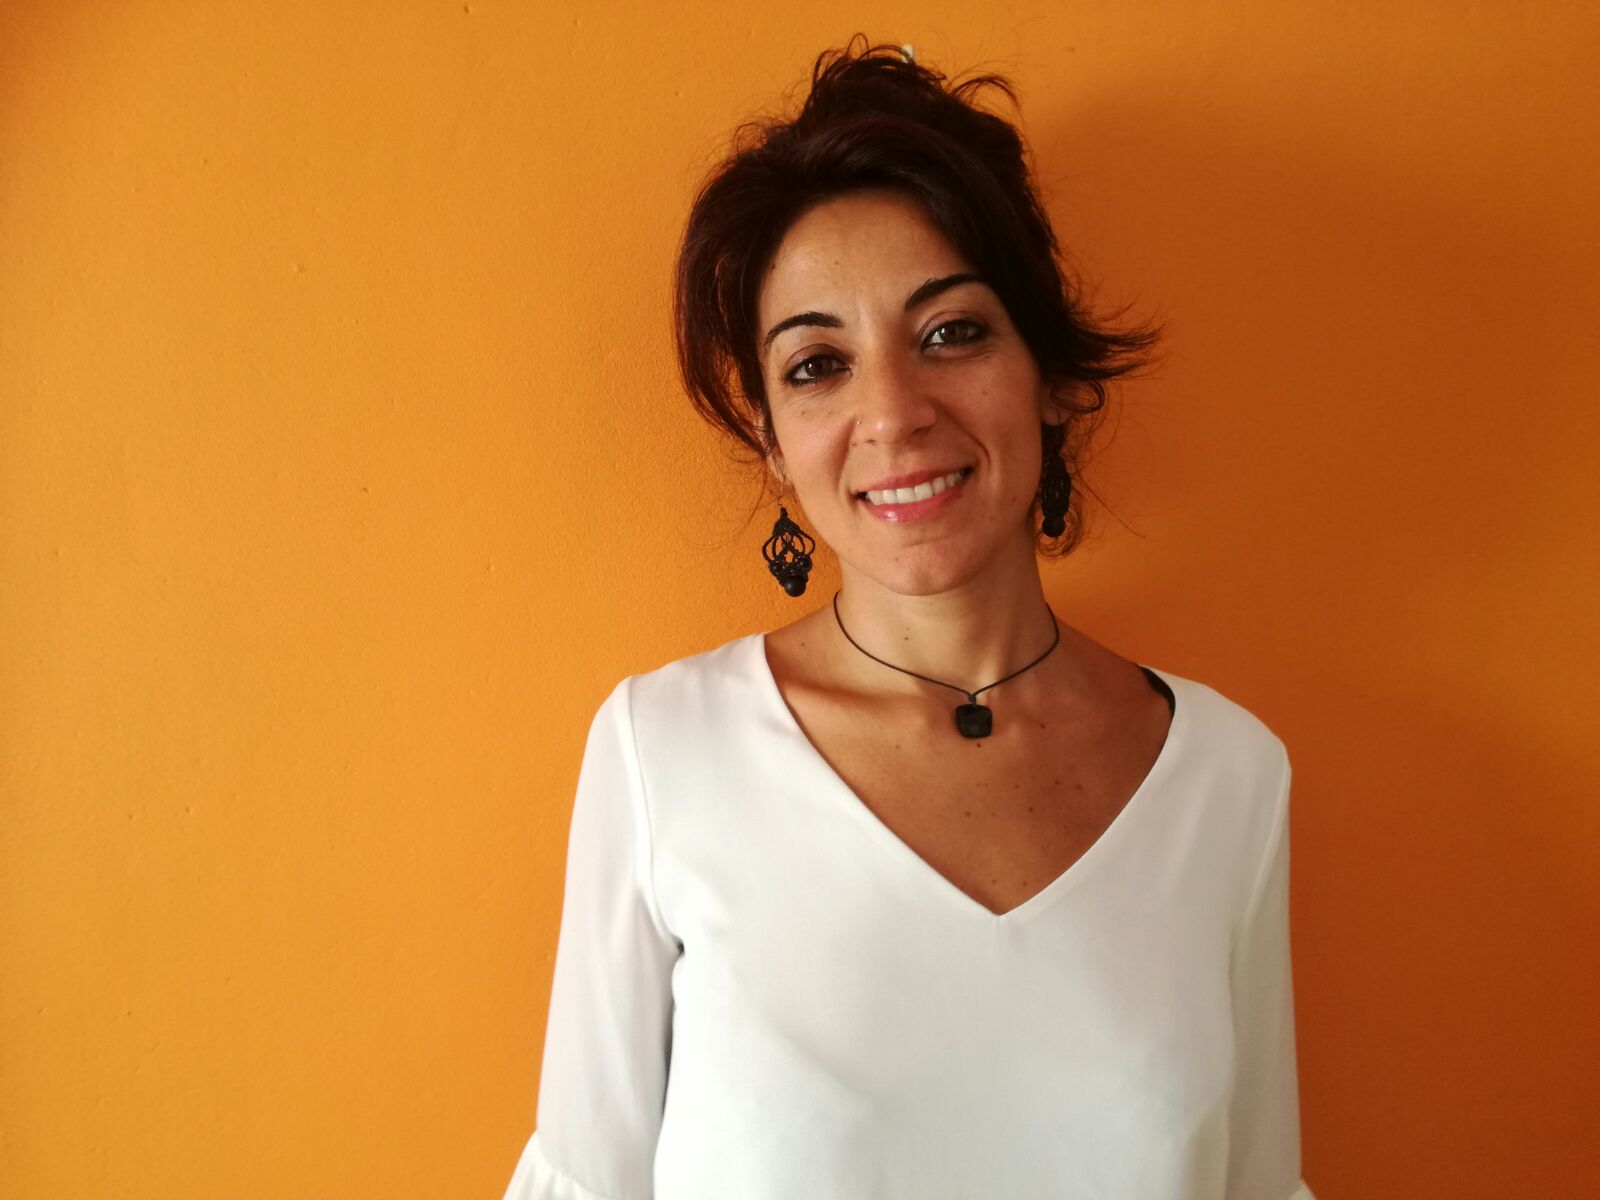 Rosaria Chifari joins the ENT Foundation to work on the DECISIVE project